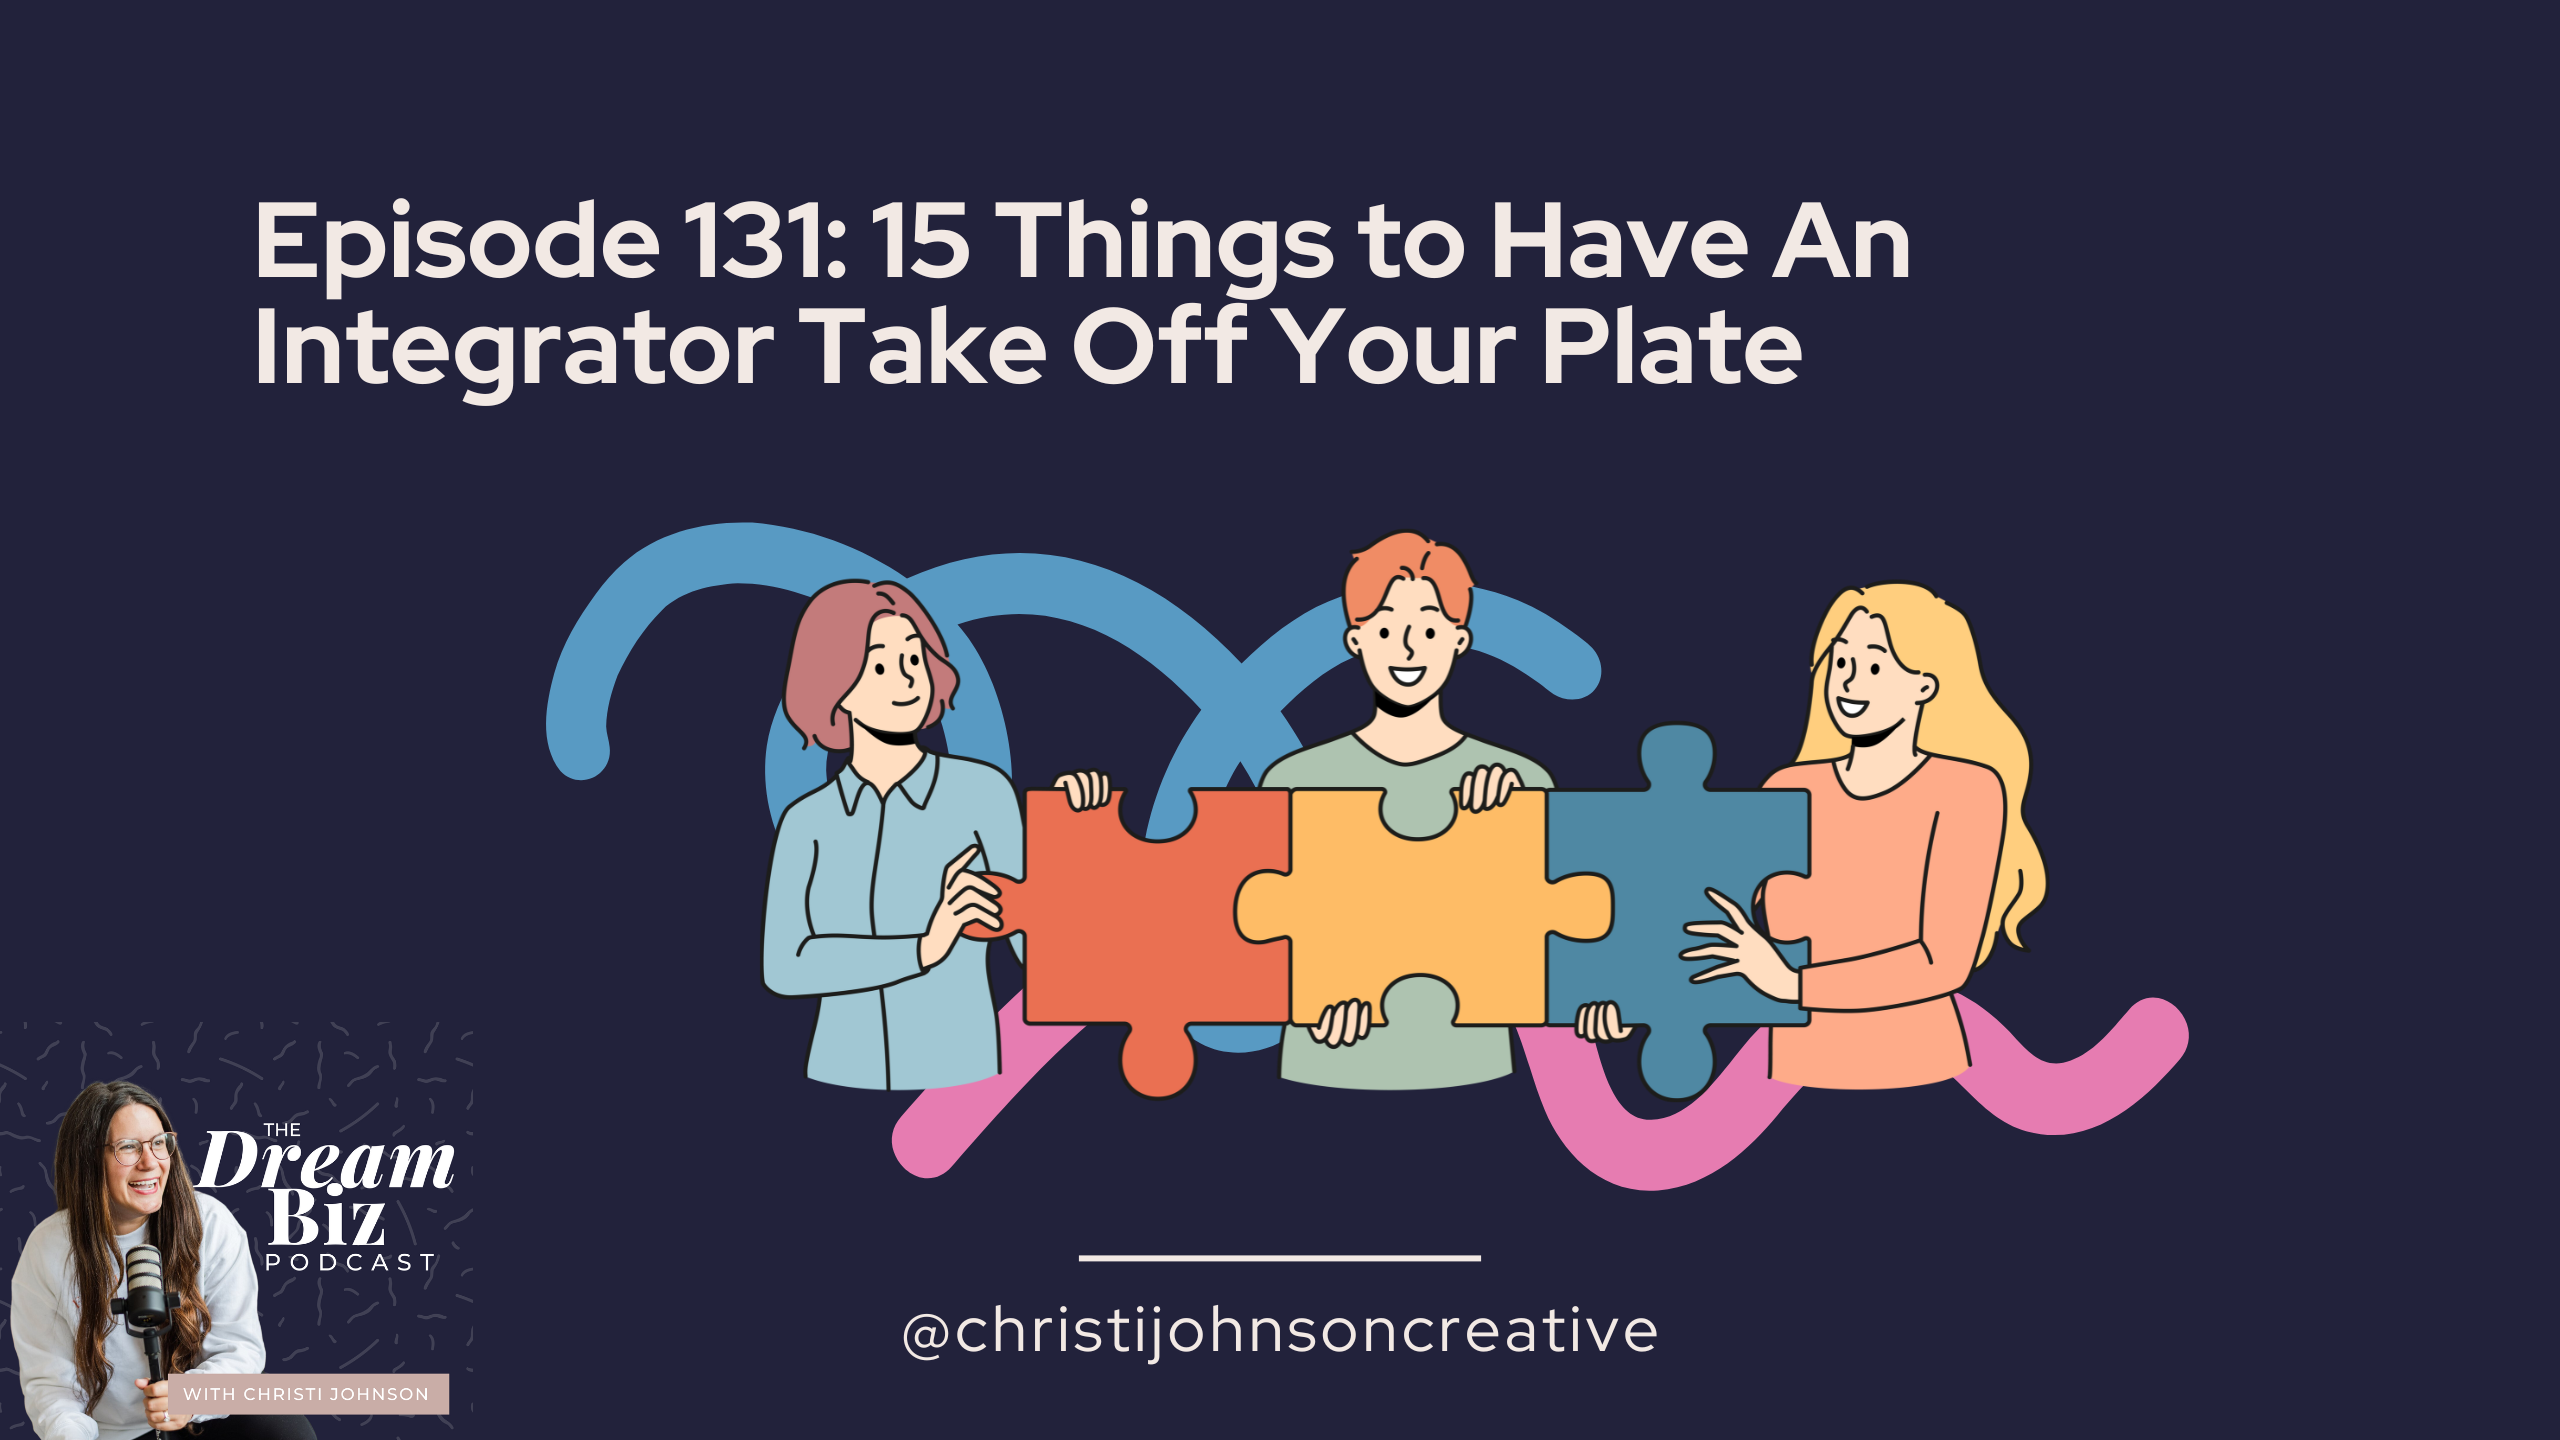 ID: Episode 131: 15 Things to have an integrator take off your plate.